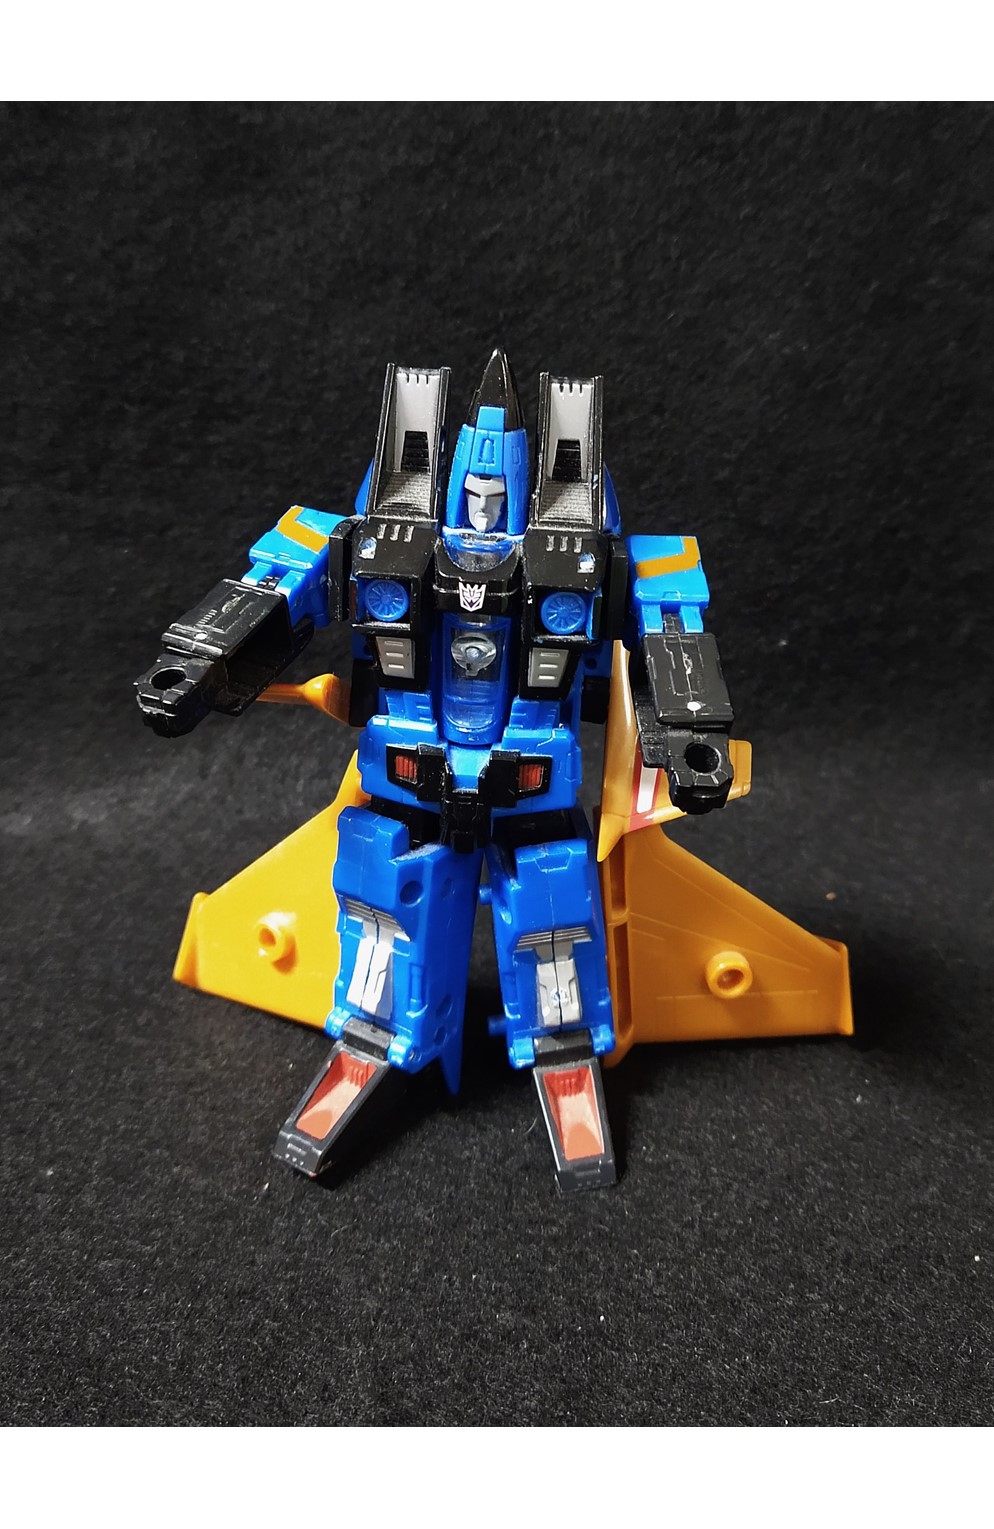 Transformers 2010 Generations Deluxe Class Dirge